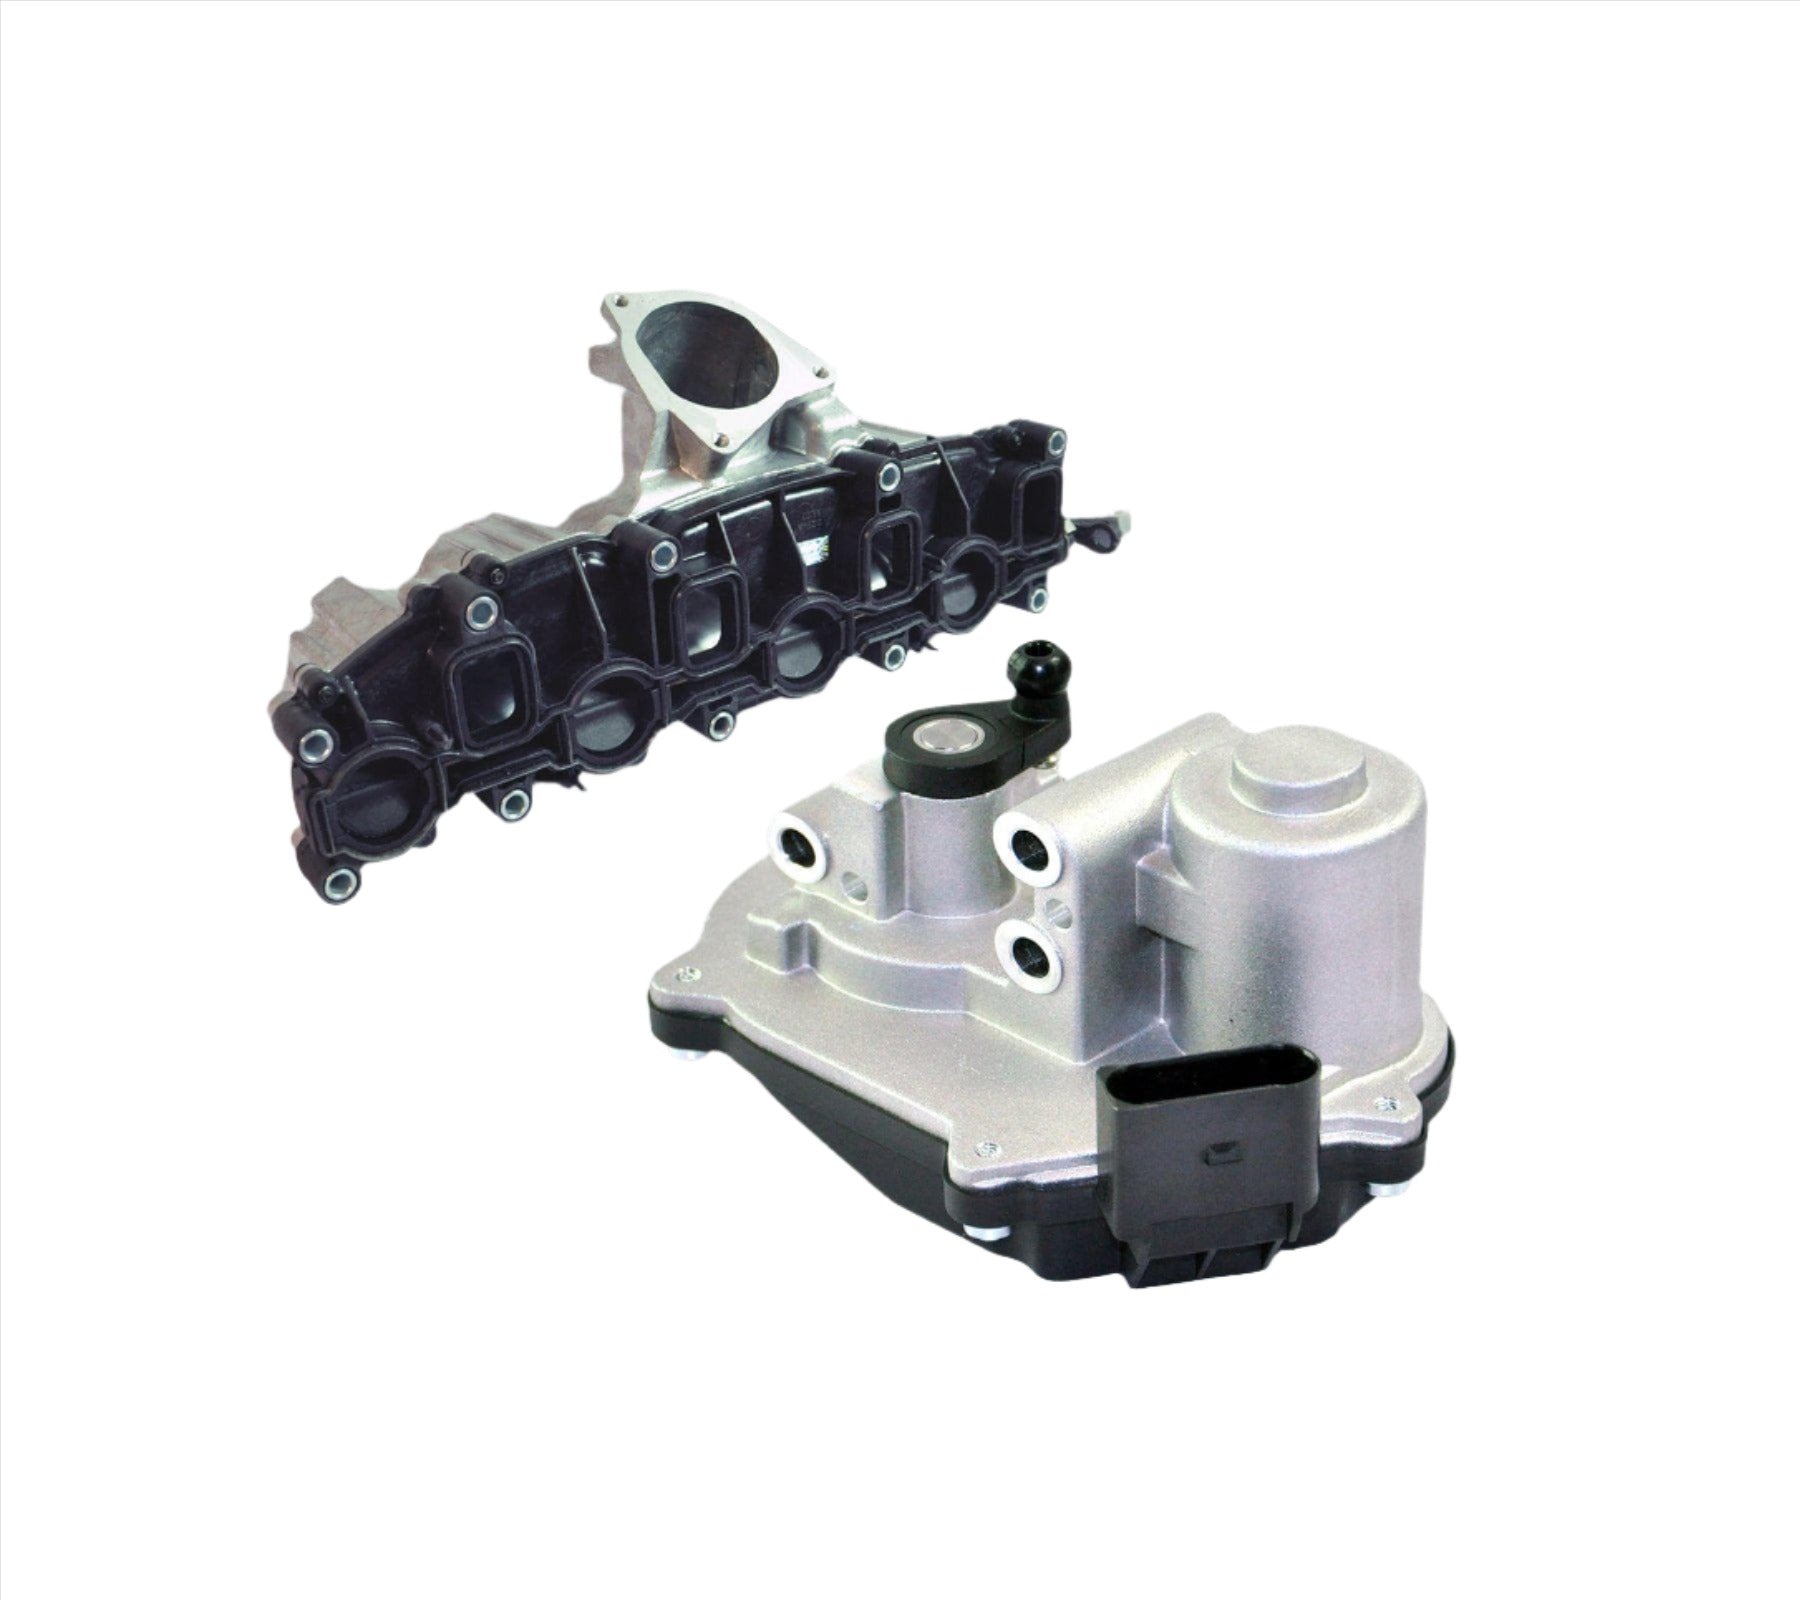 Intake Manifold With Actuator Motor For Audi/Vw/Seat/Skoda D2P Autoparts